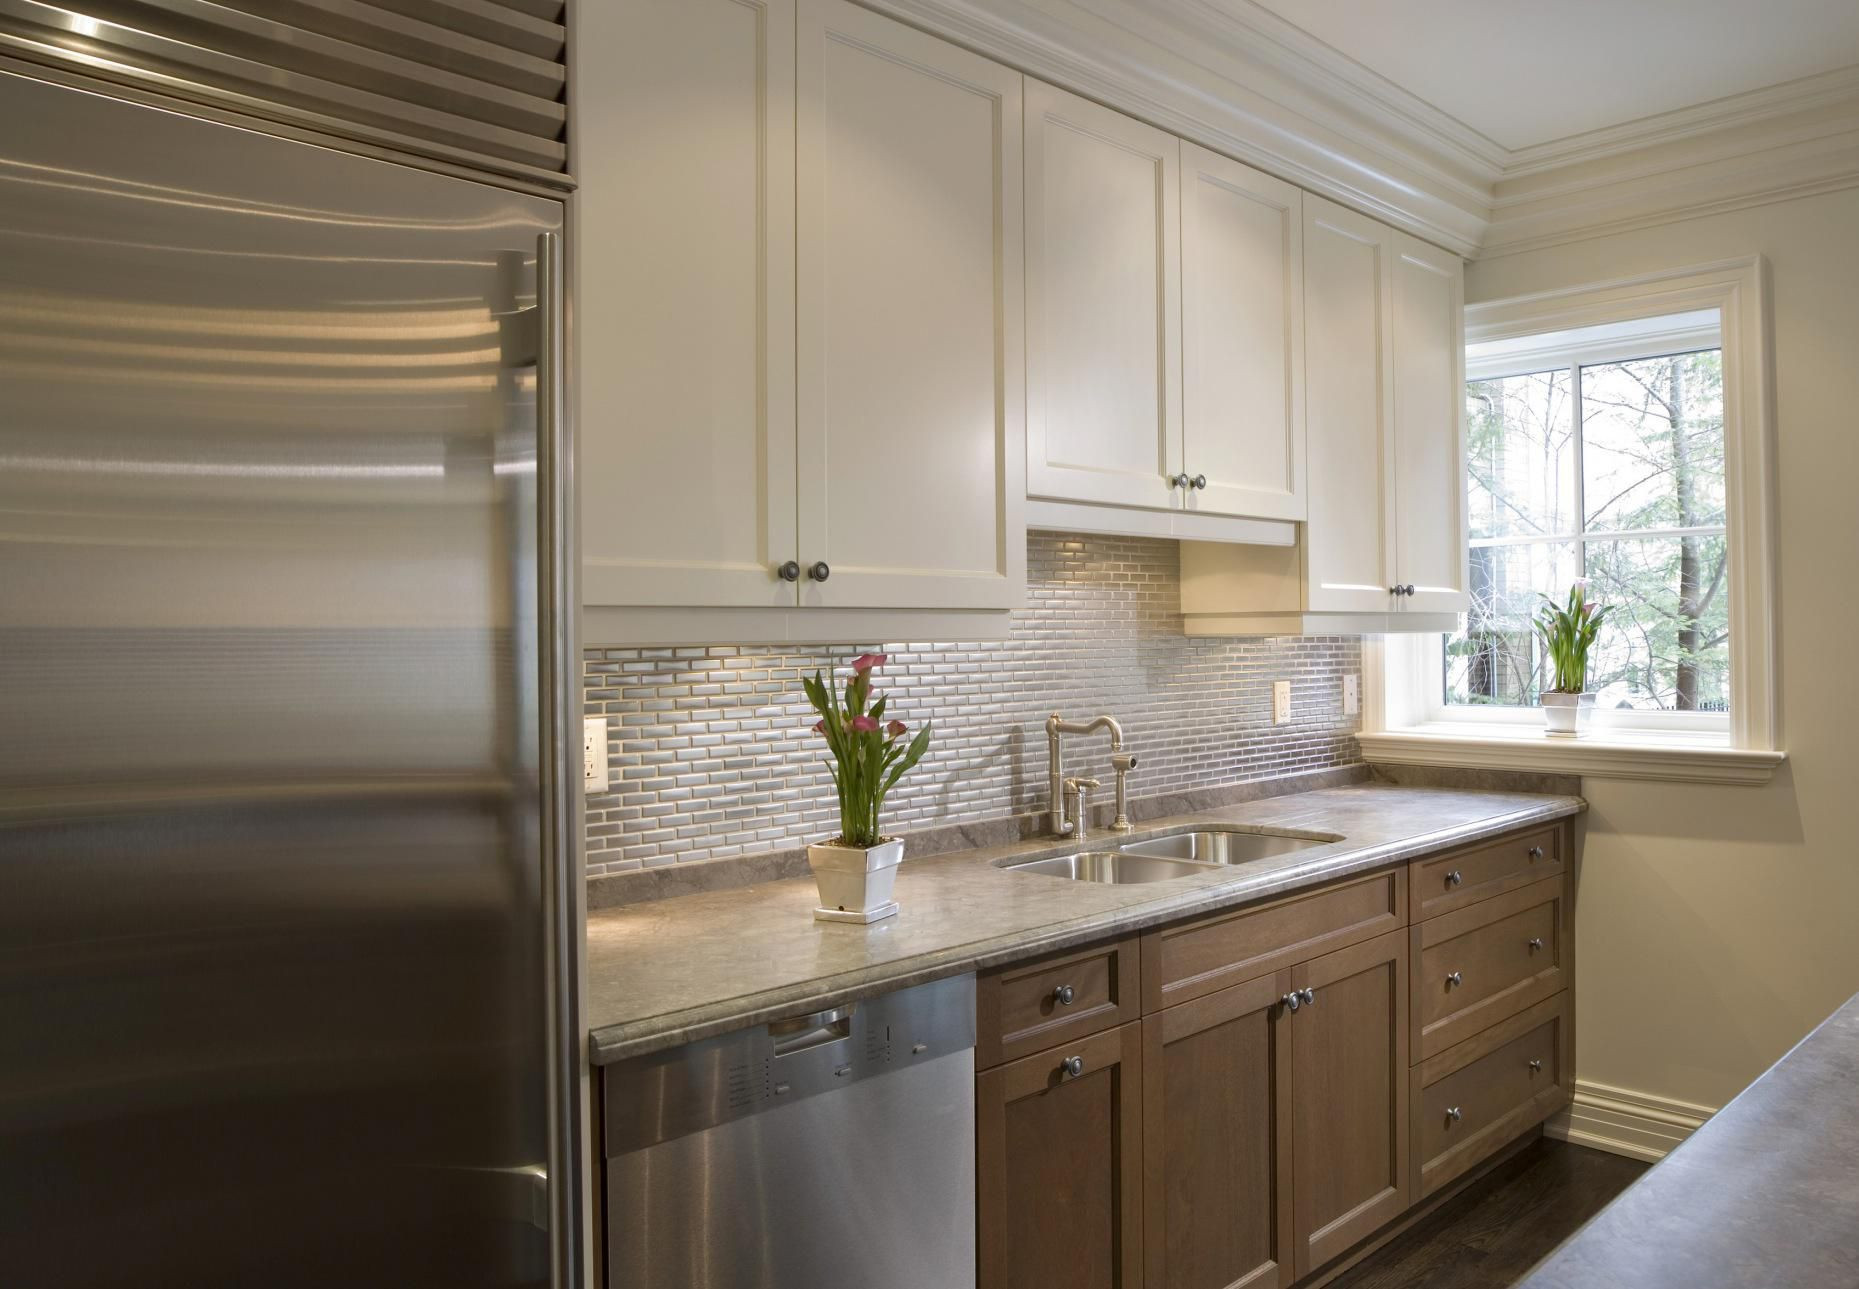 Remodel A Small Kitchen
 Small Kitchen Remodeling Home Renovations